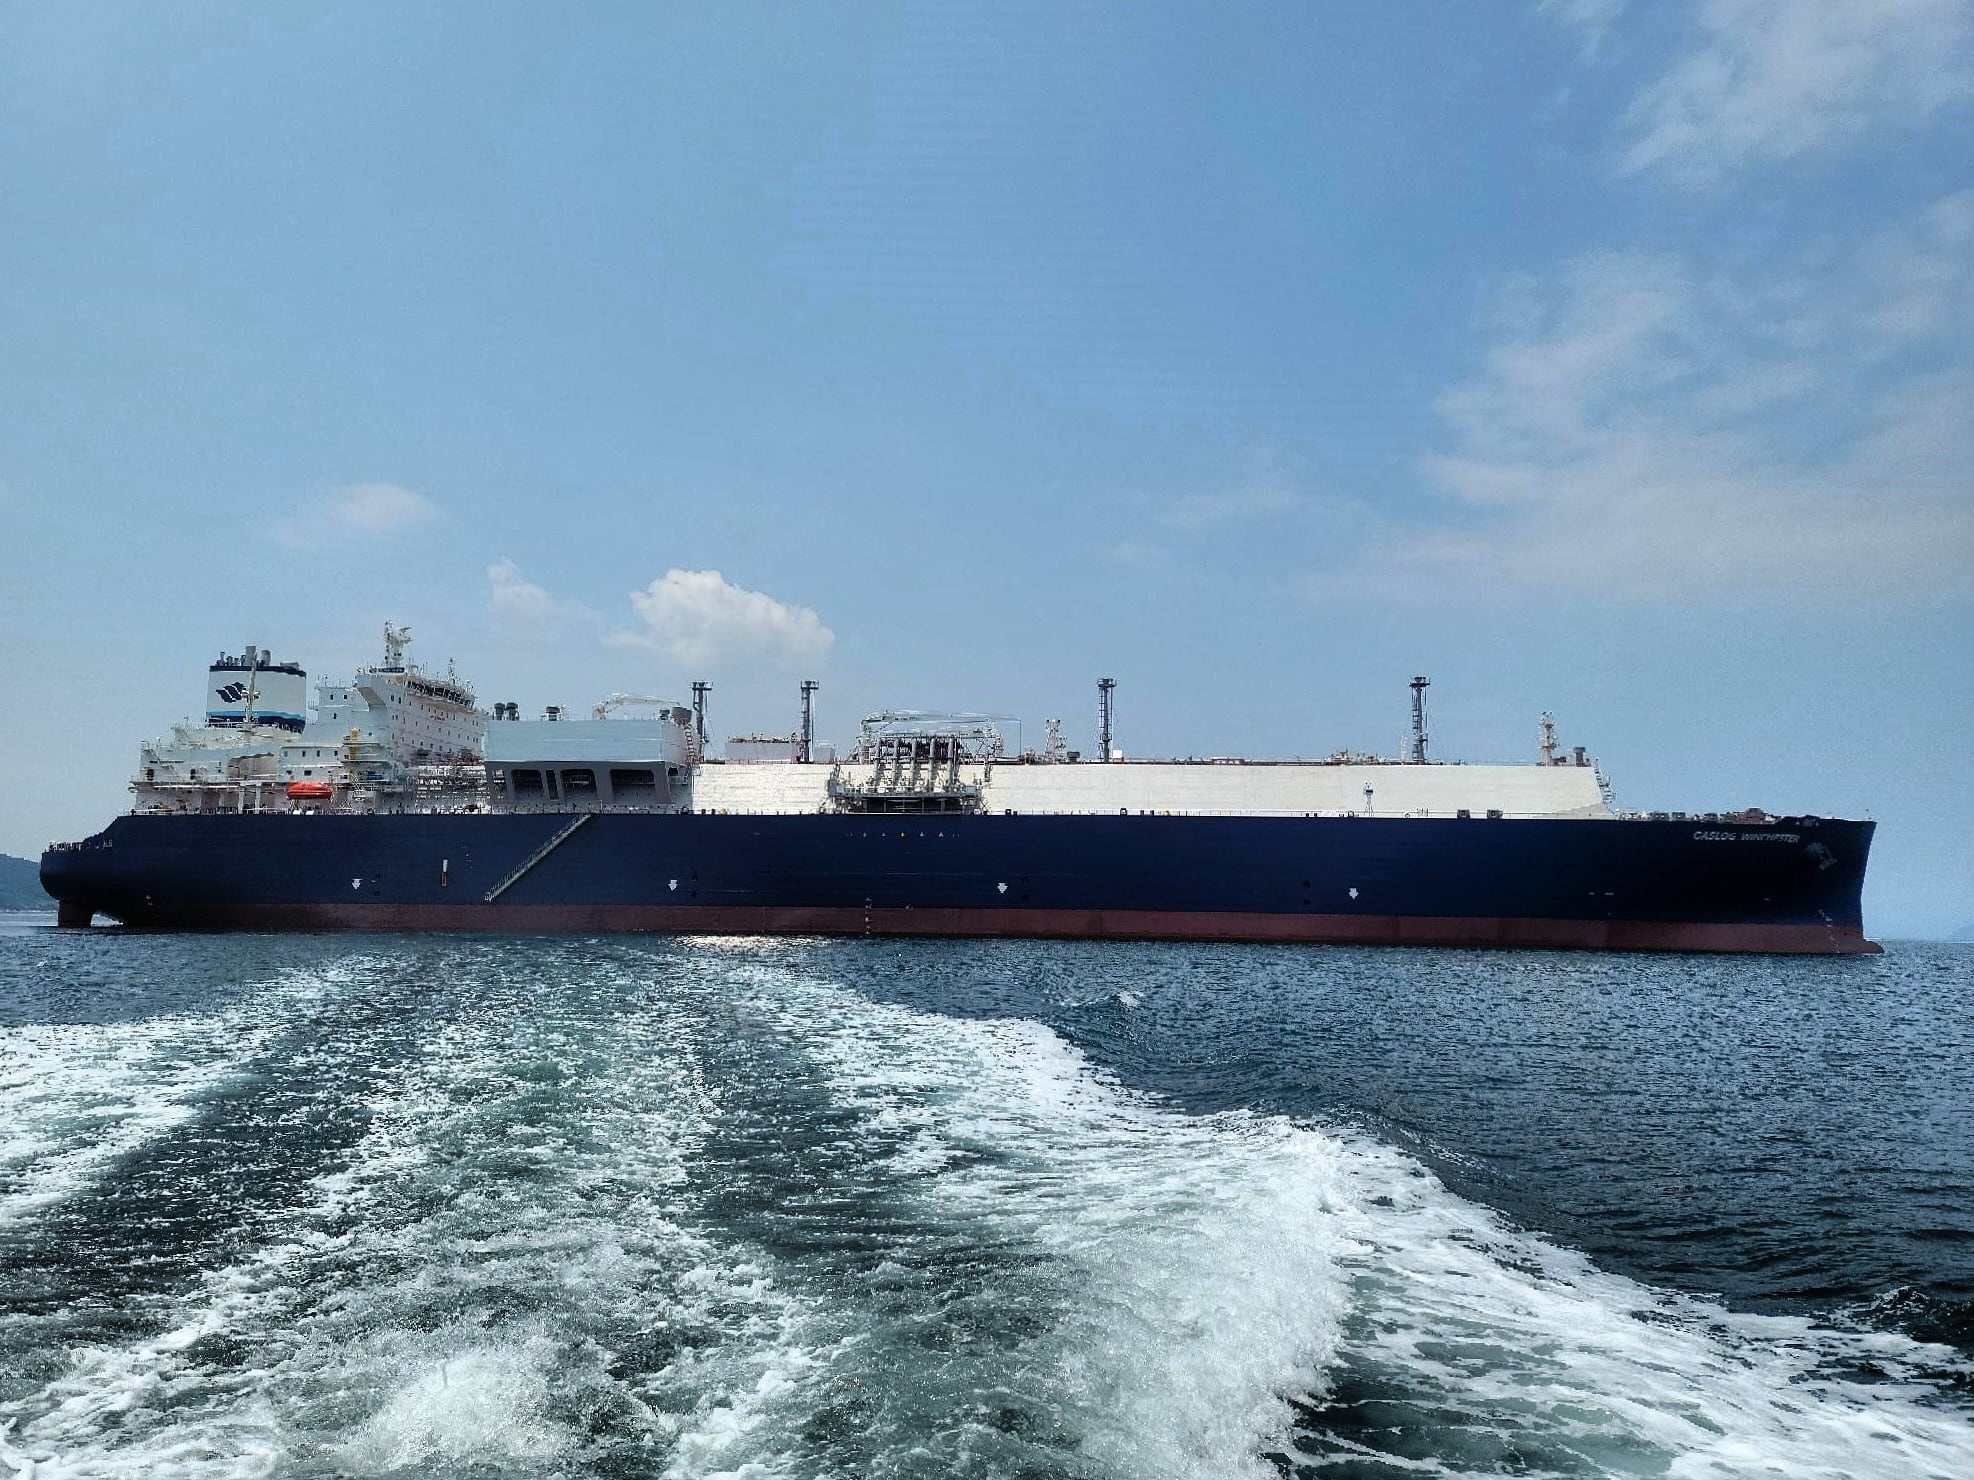 GasLog Winchester Samsung Heavy Industries launches GasLog's new LNG carrier